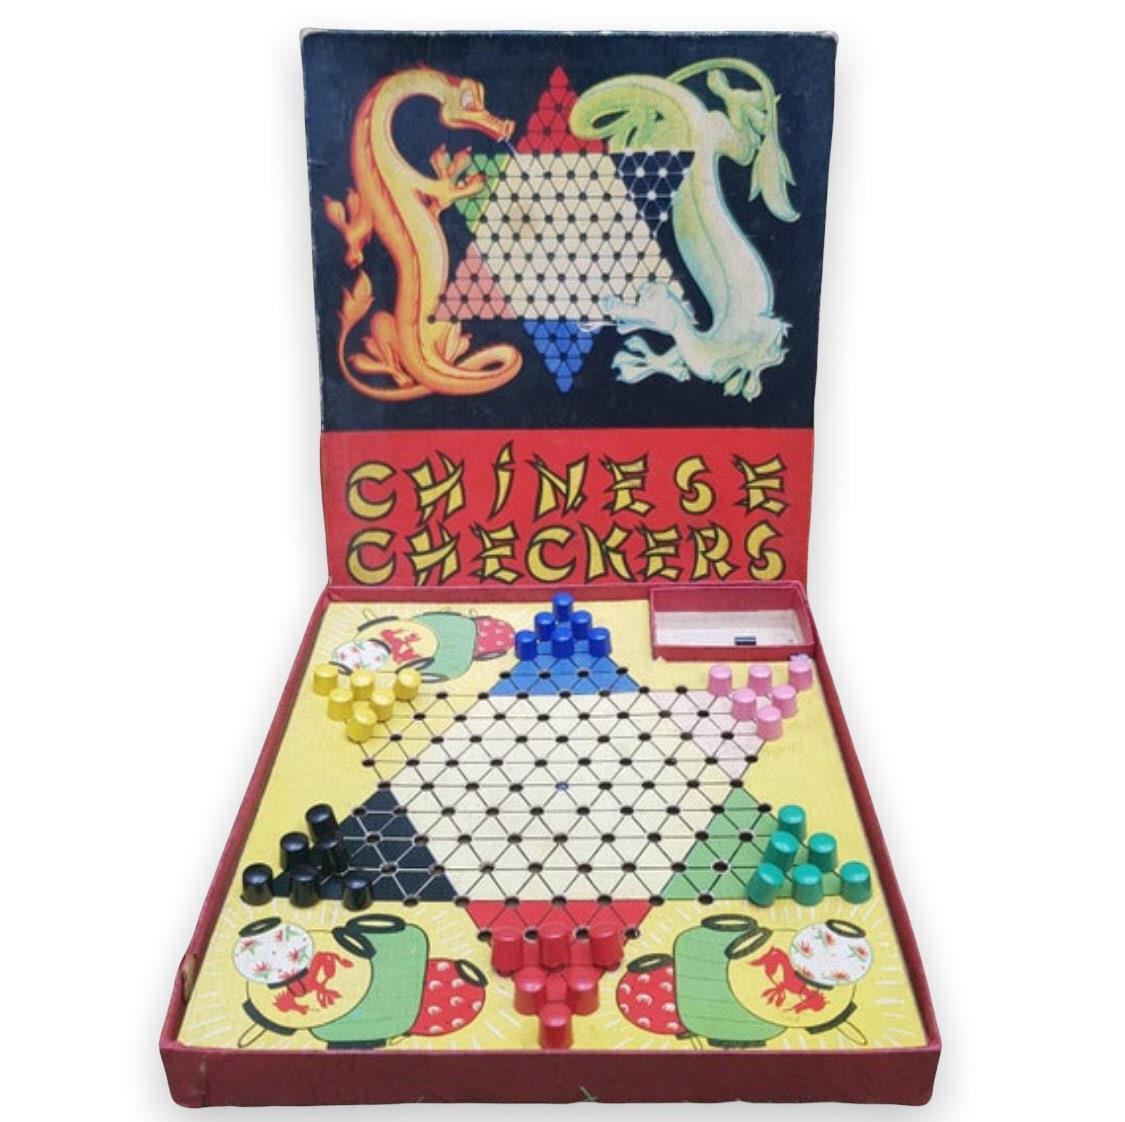 Beyond Checkers and Candyland: 8 Unusual and Educational Board